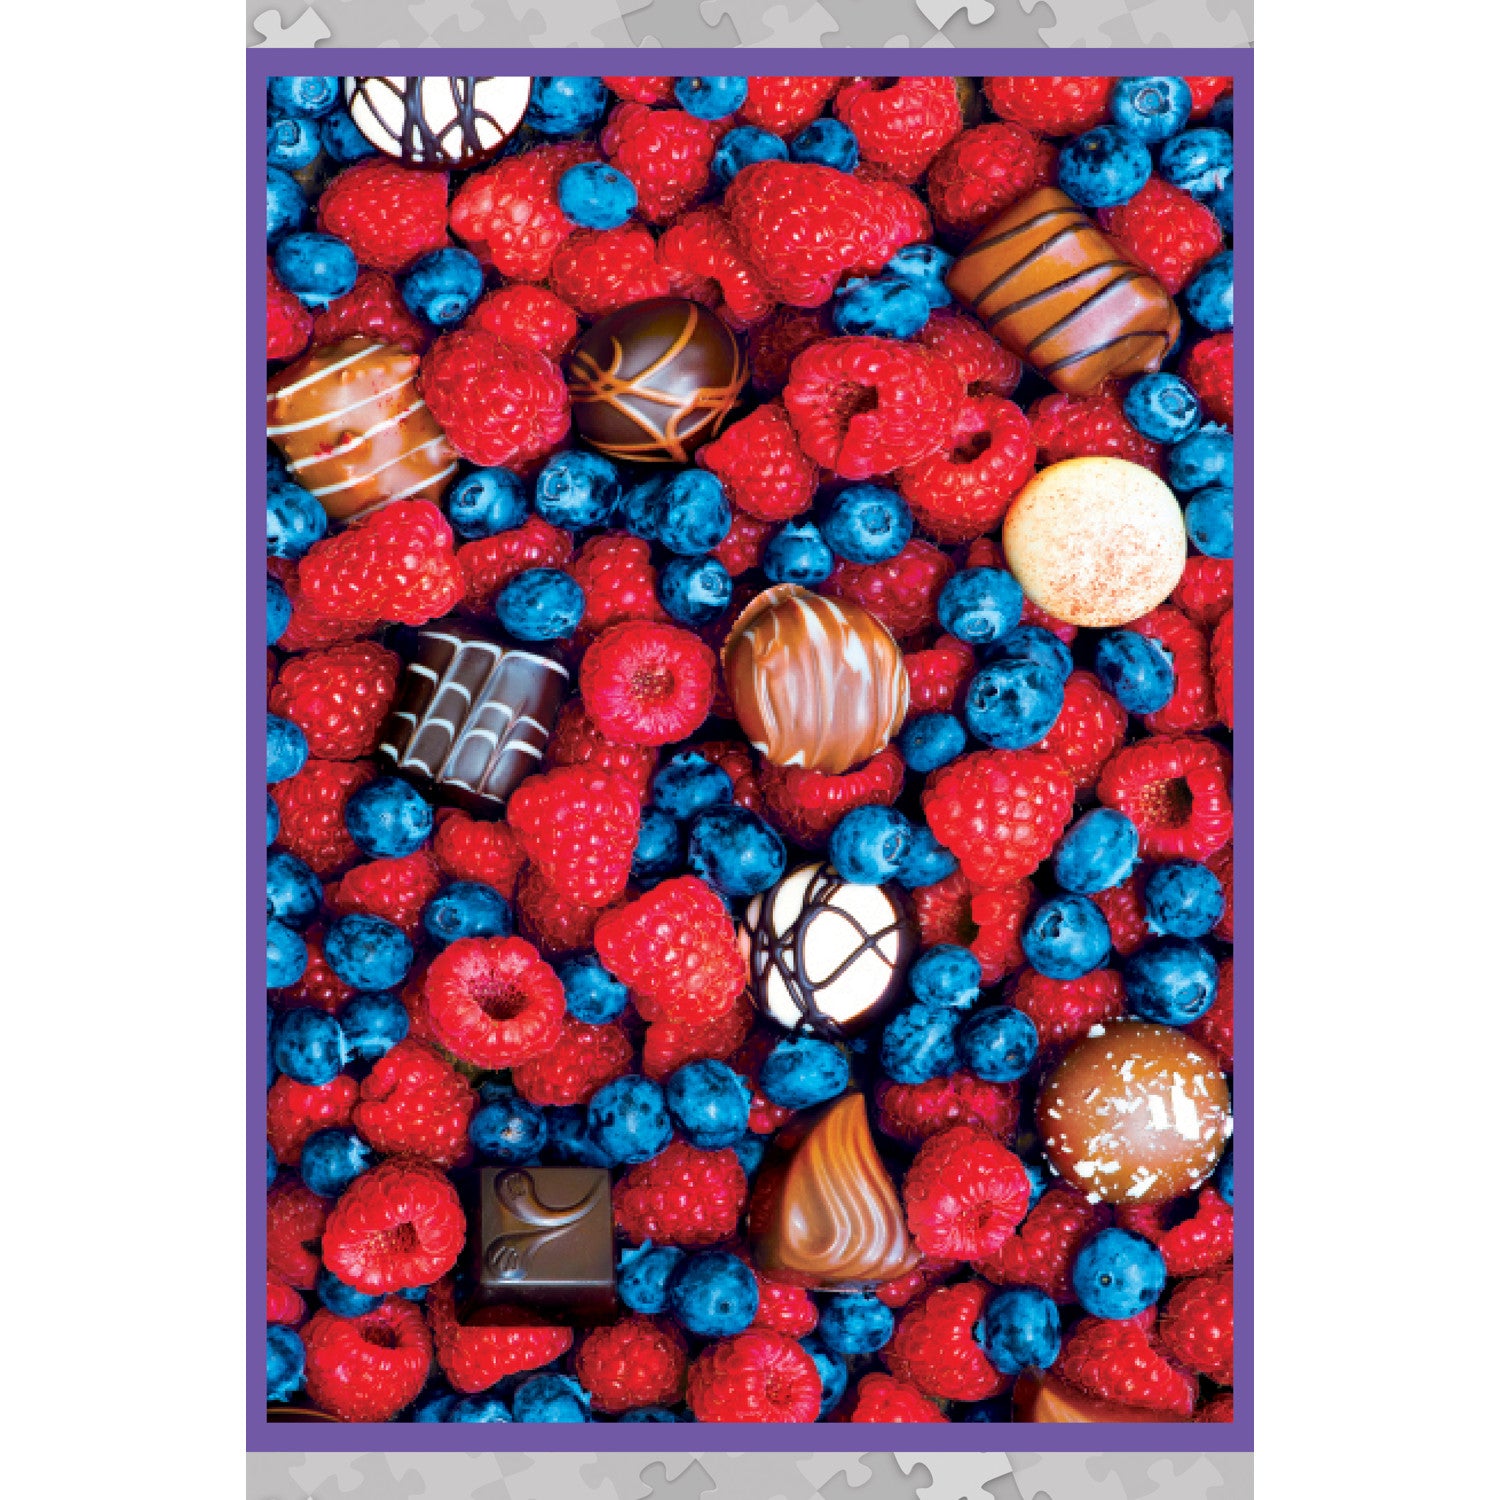 World's Smallest - Sweet Delights 1000 Piece Puzzle